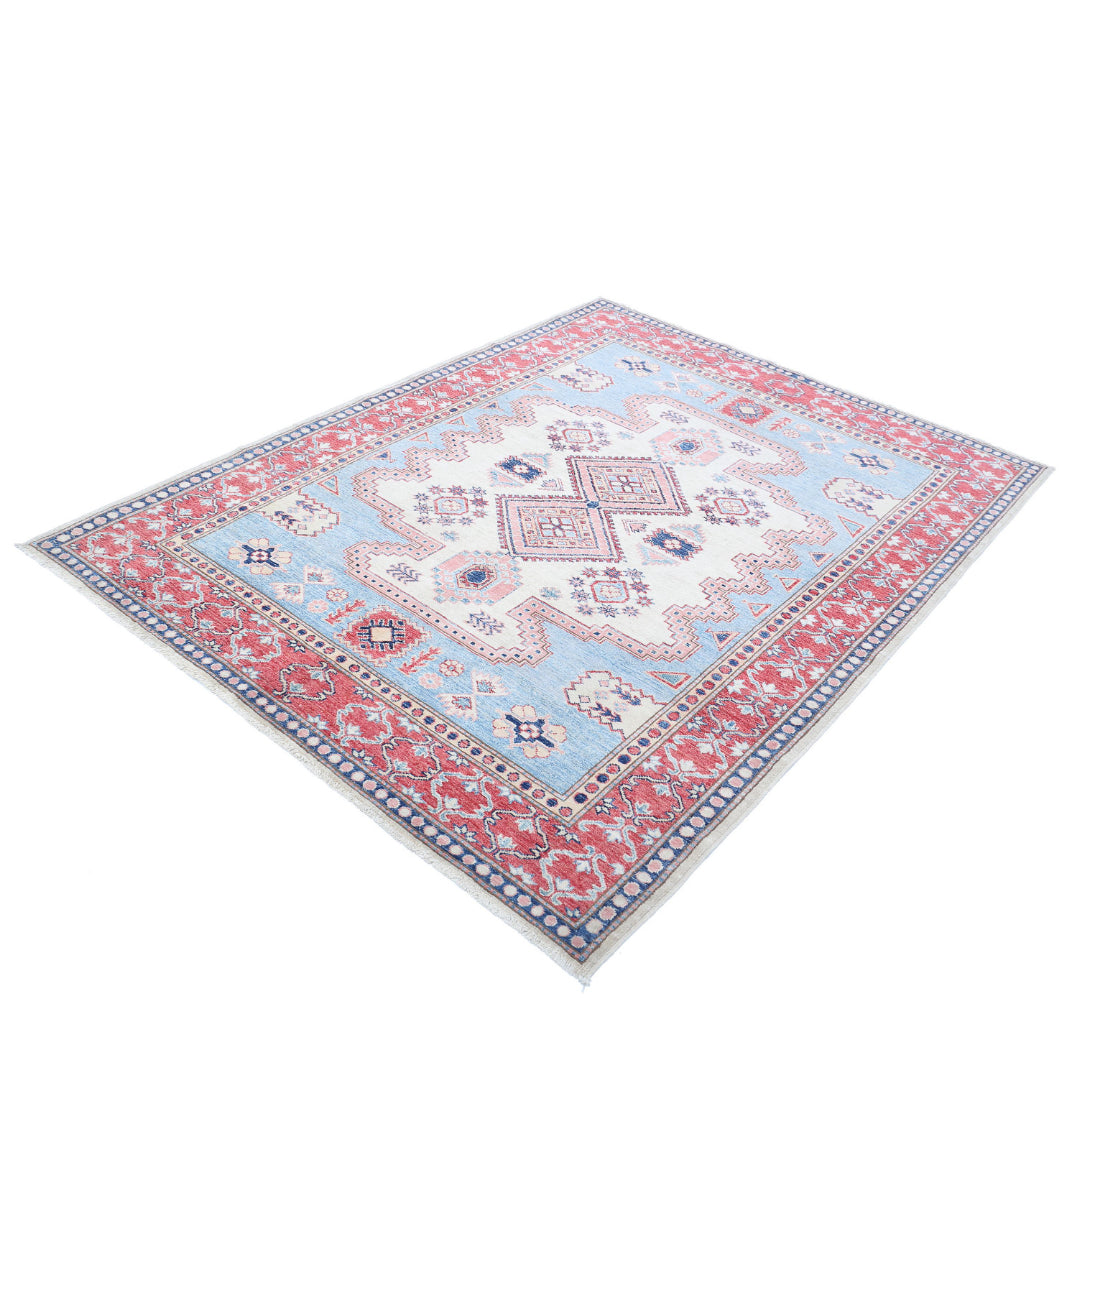 Kazak 5'1'' X 6'9'' Hand-Knotted Wool Rug 5'1'' x 6'9'' (153 X 203) / Teal / Red